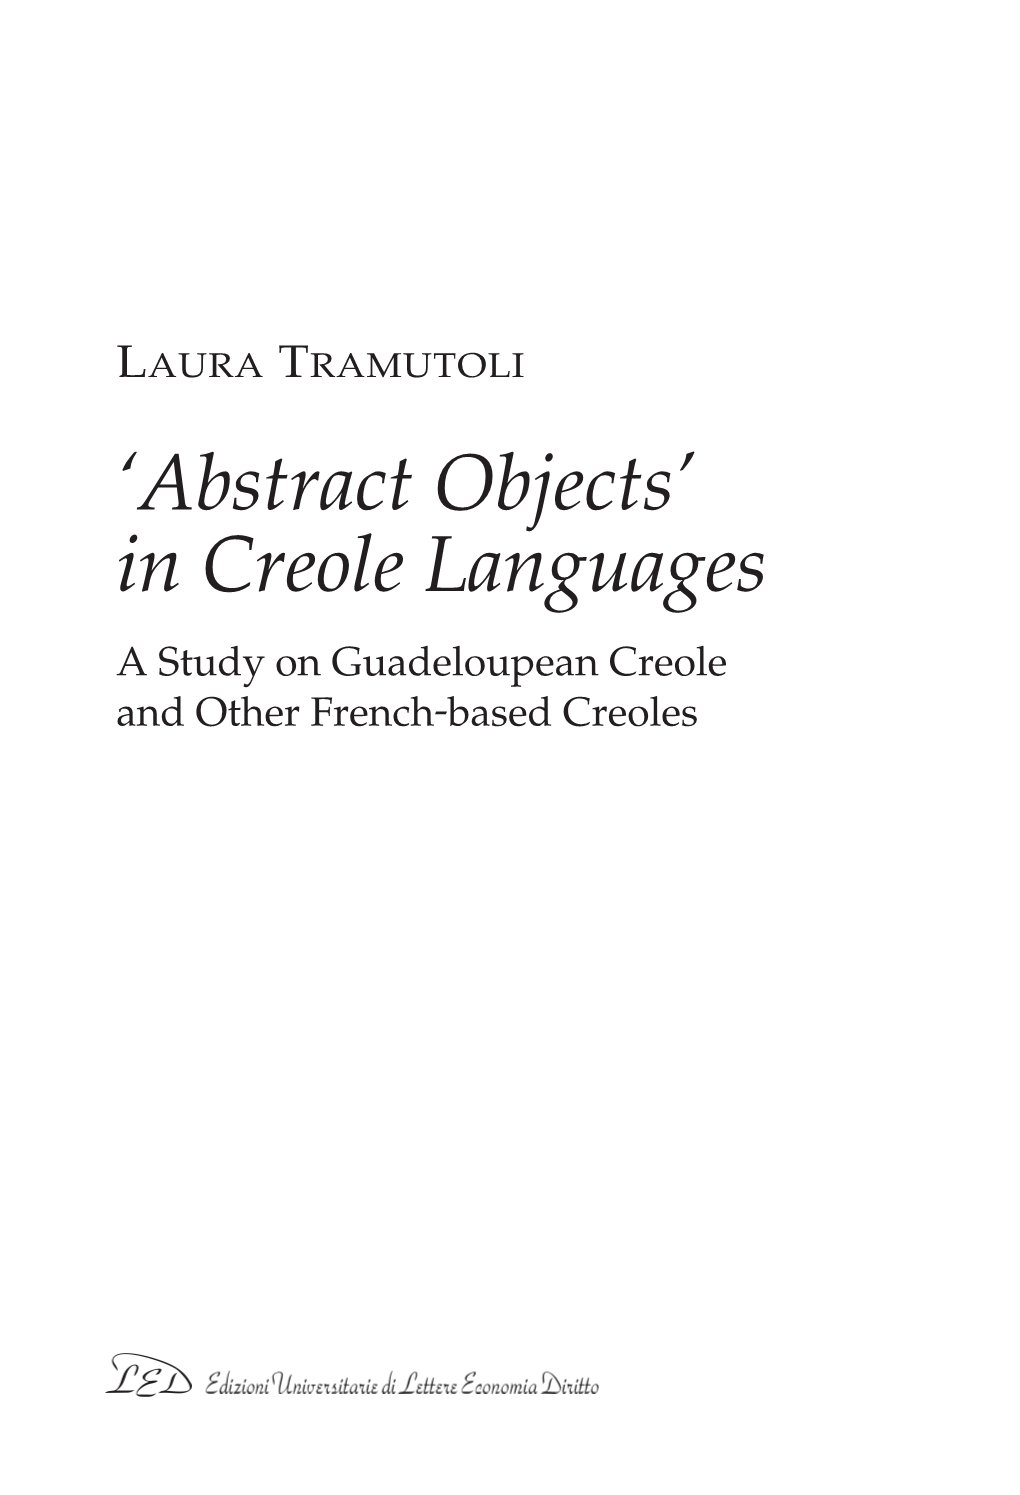 In Creole Languages a Study on Guadeloupean Creole and Other French-Based Creoles